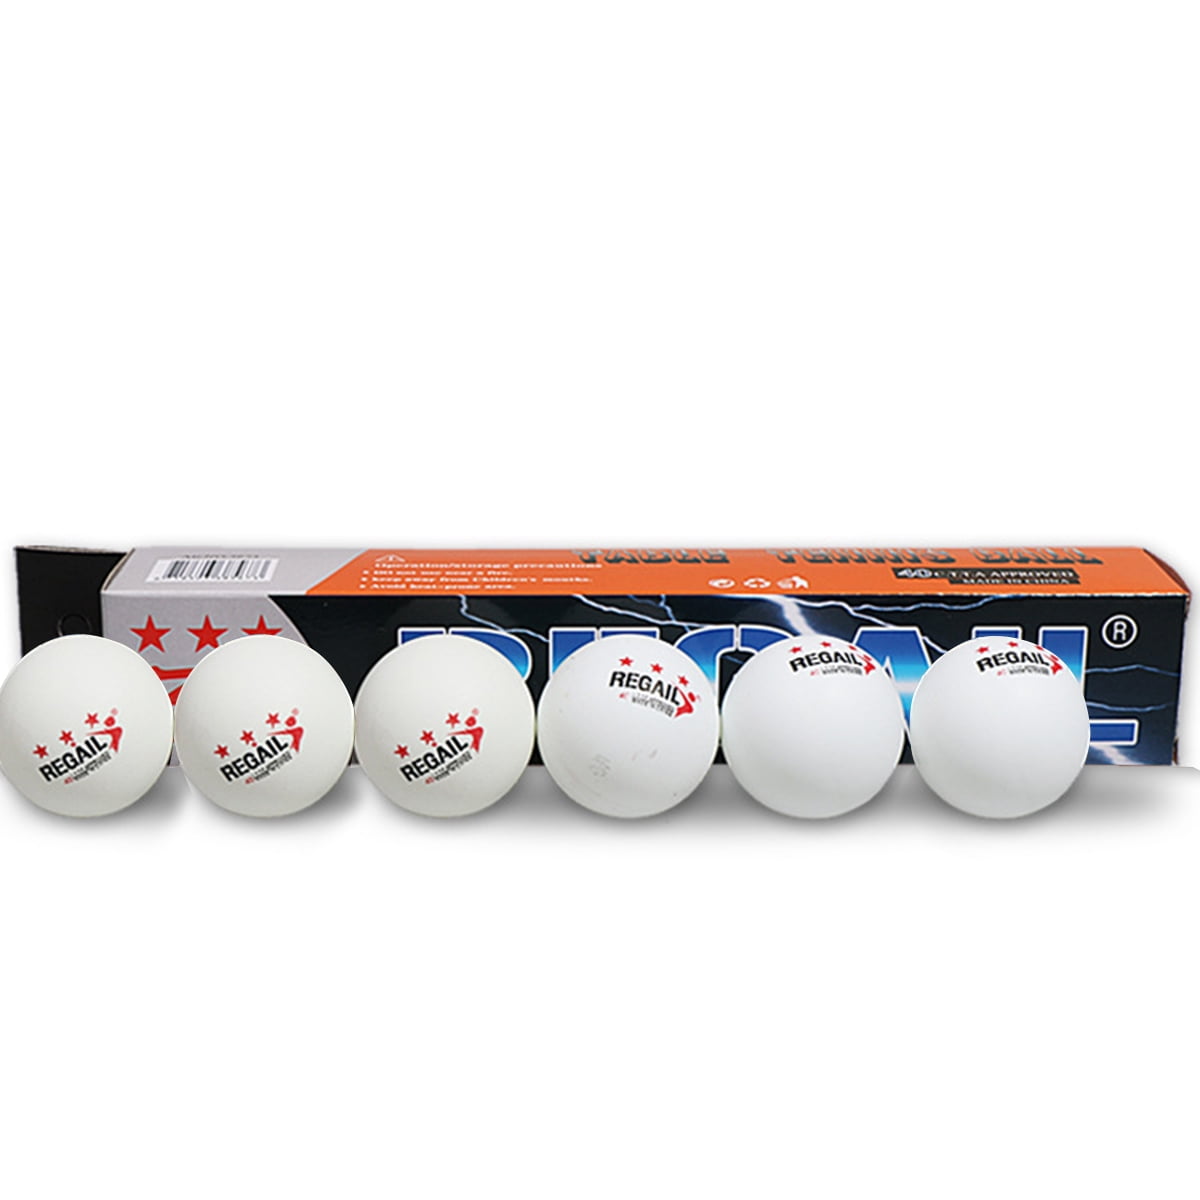 iFCOW 6pcs Table Tennis Ball Replacement Ping Pong Balls for Competition Training 40mm 